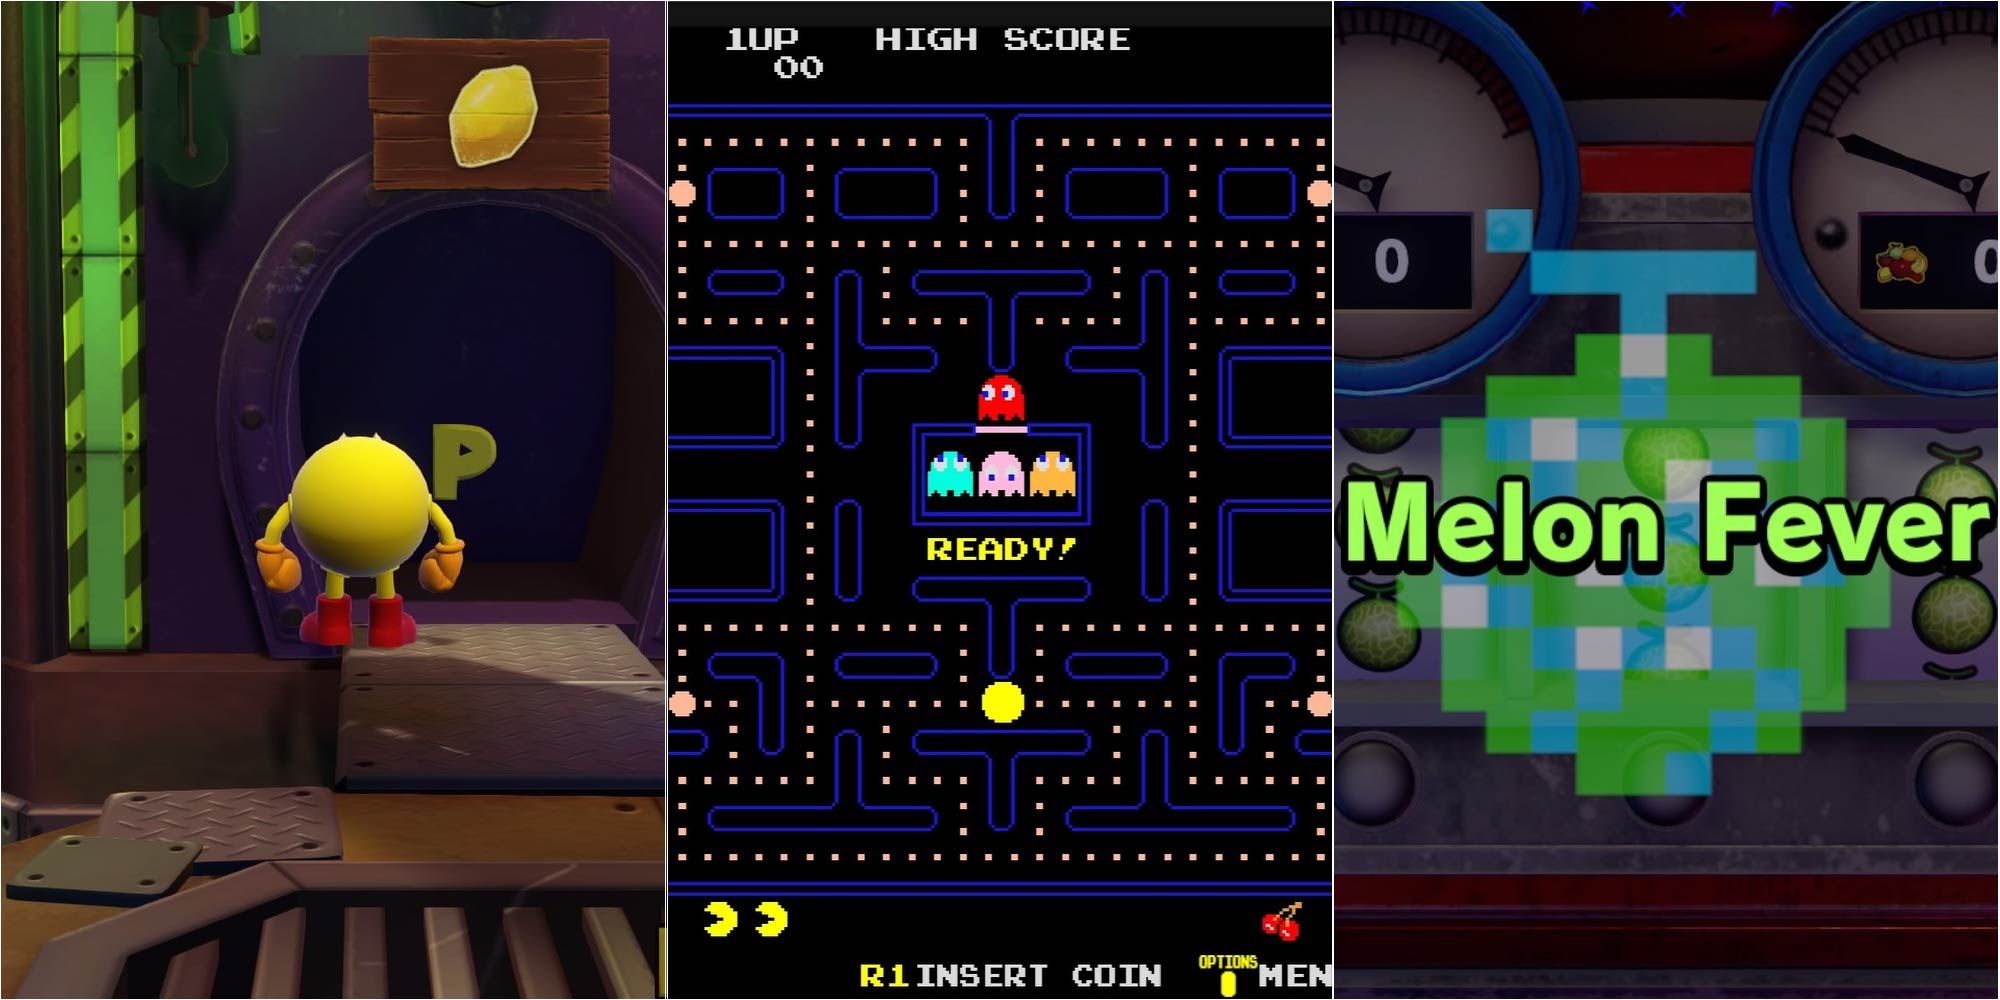 A montage showing a collectible, the original Pac-Man arcade, and the slot machine from Pac-Man World Re-Pac